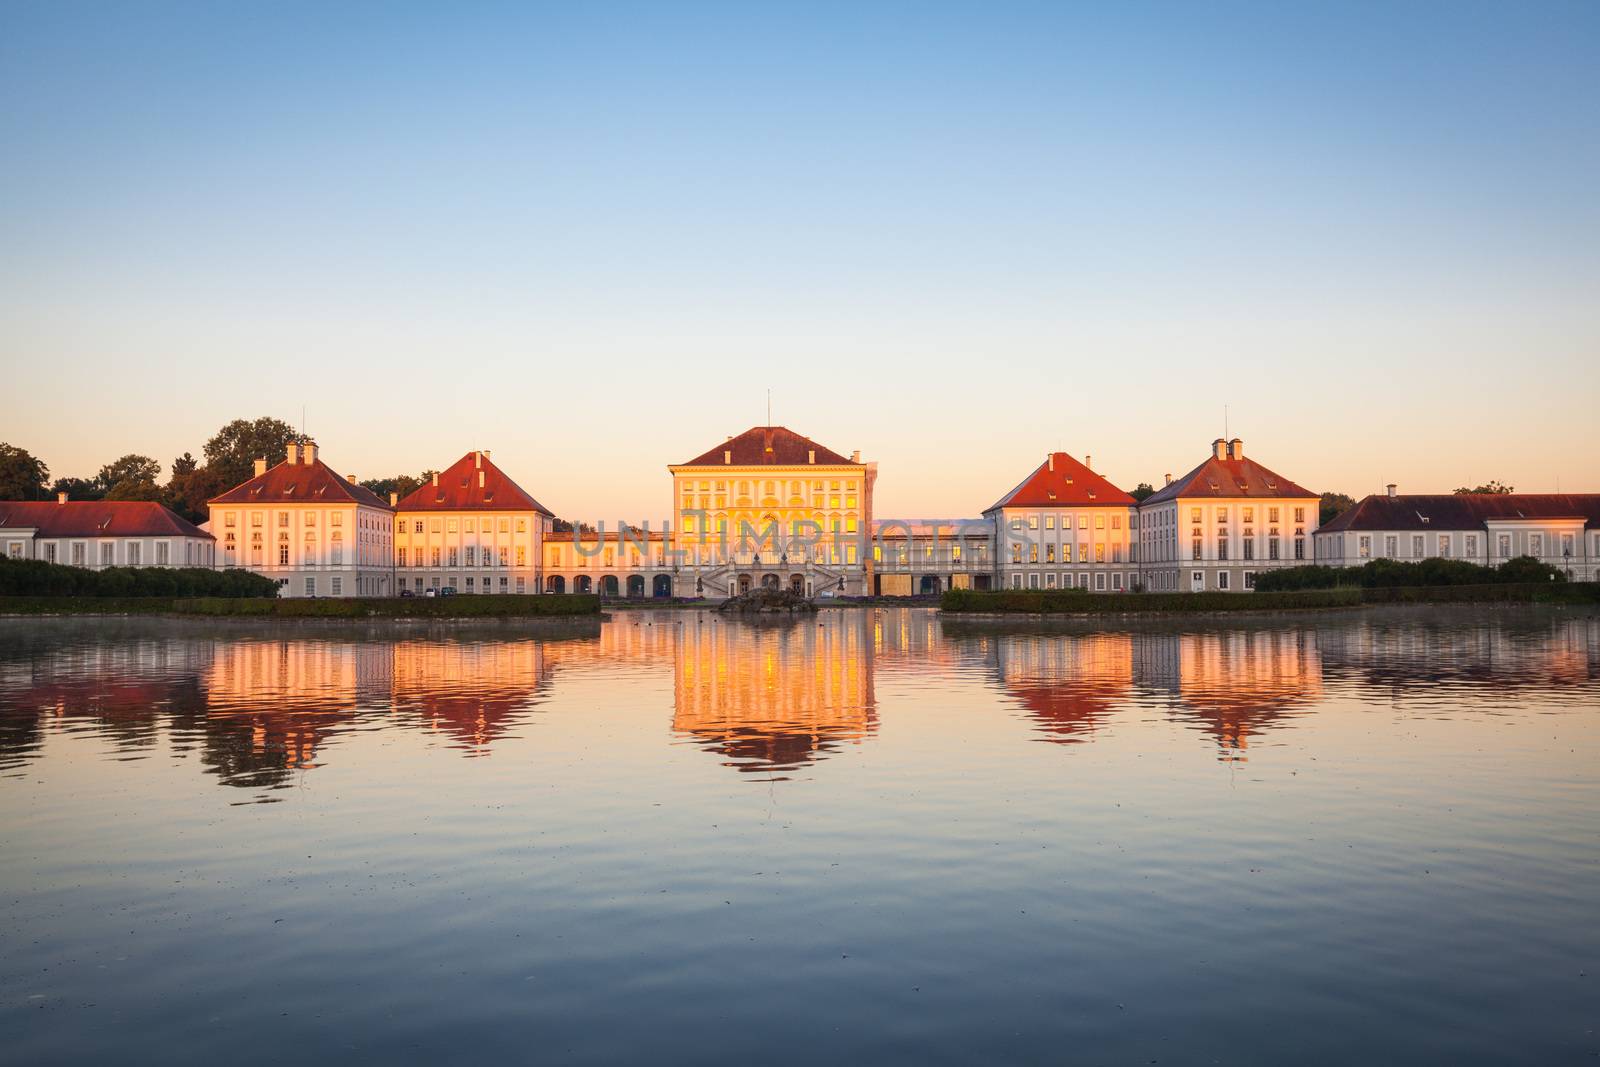 Nymphenburg palace with reflection in the morning sunlight